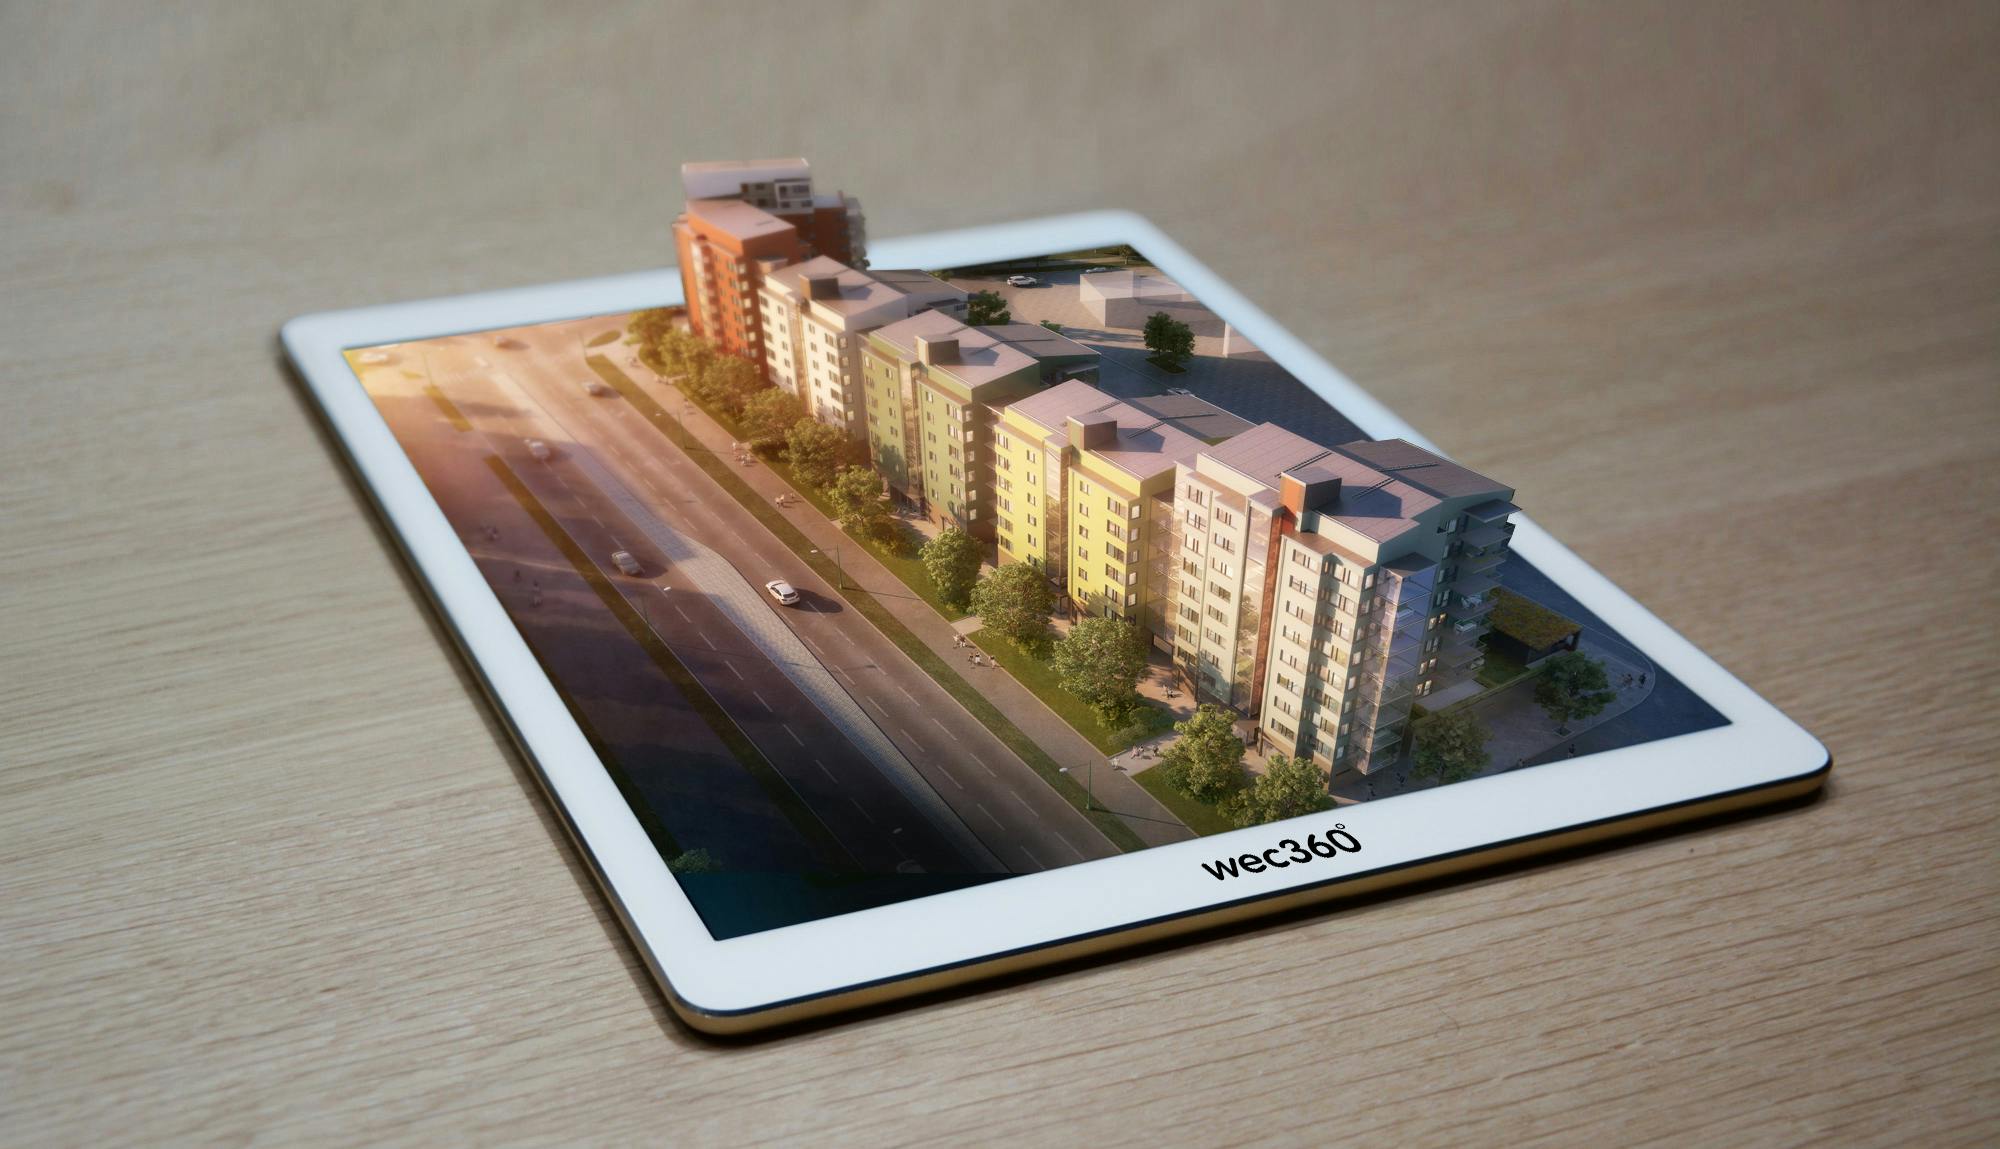 An ipad with a visualization of a house